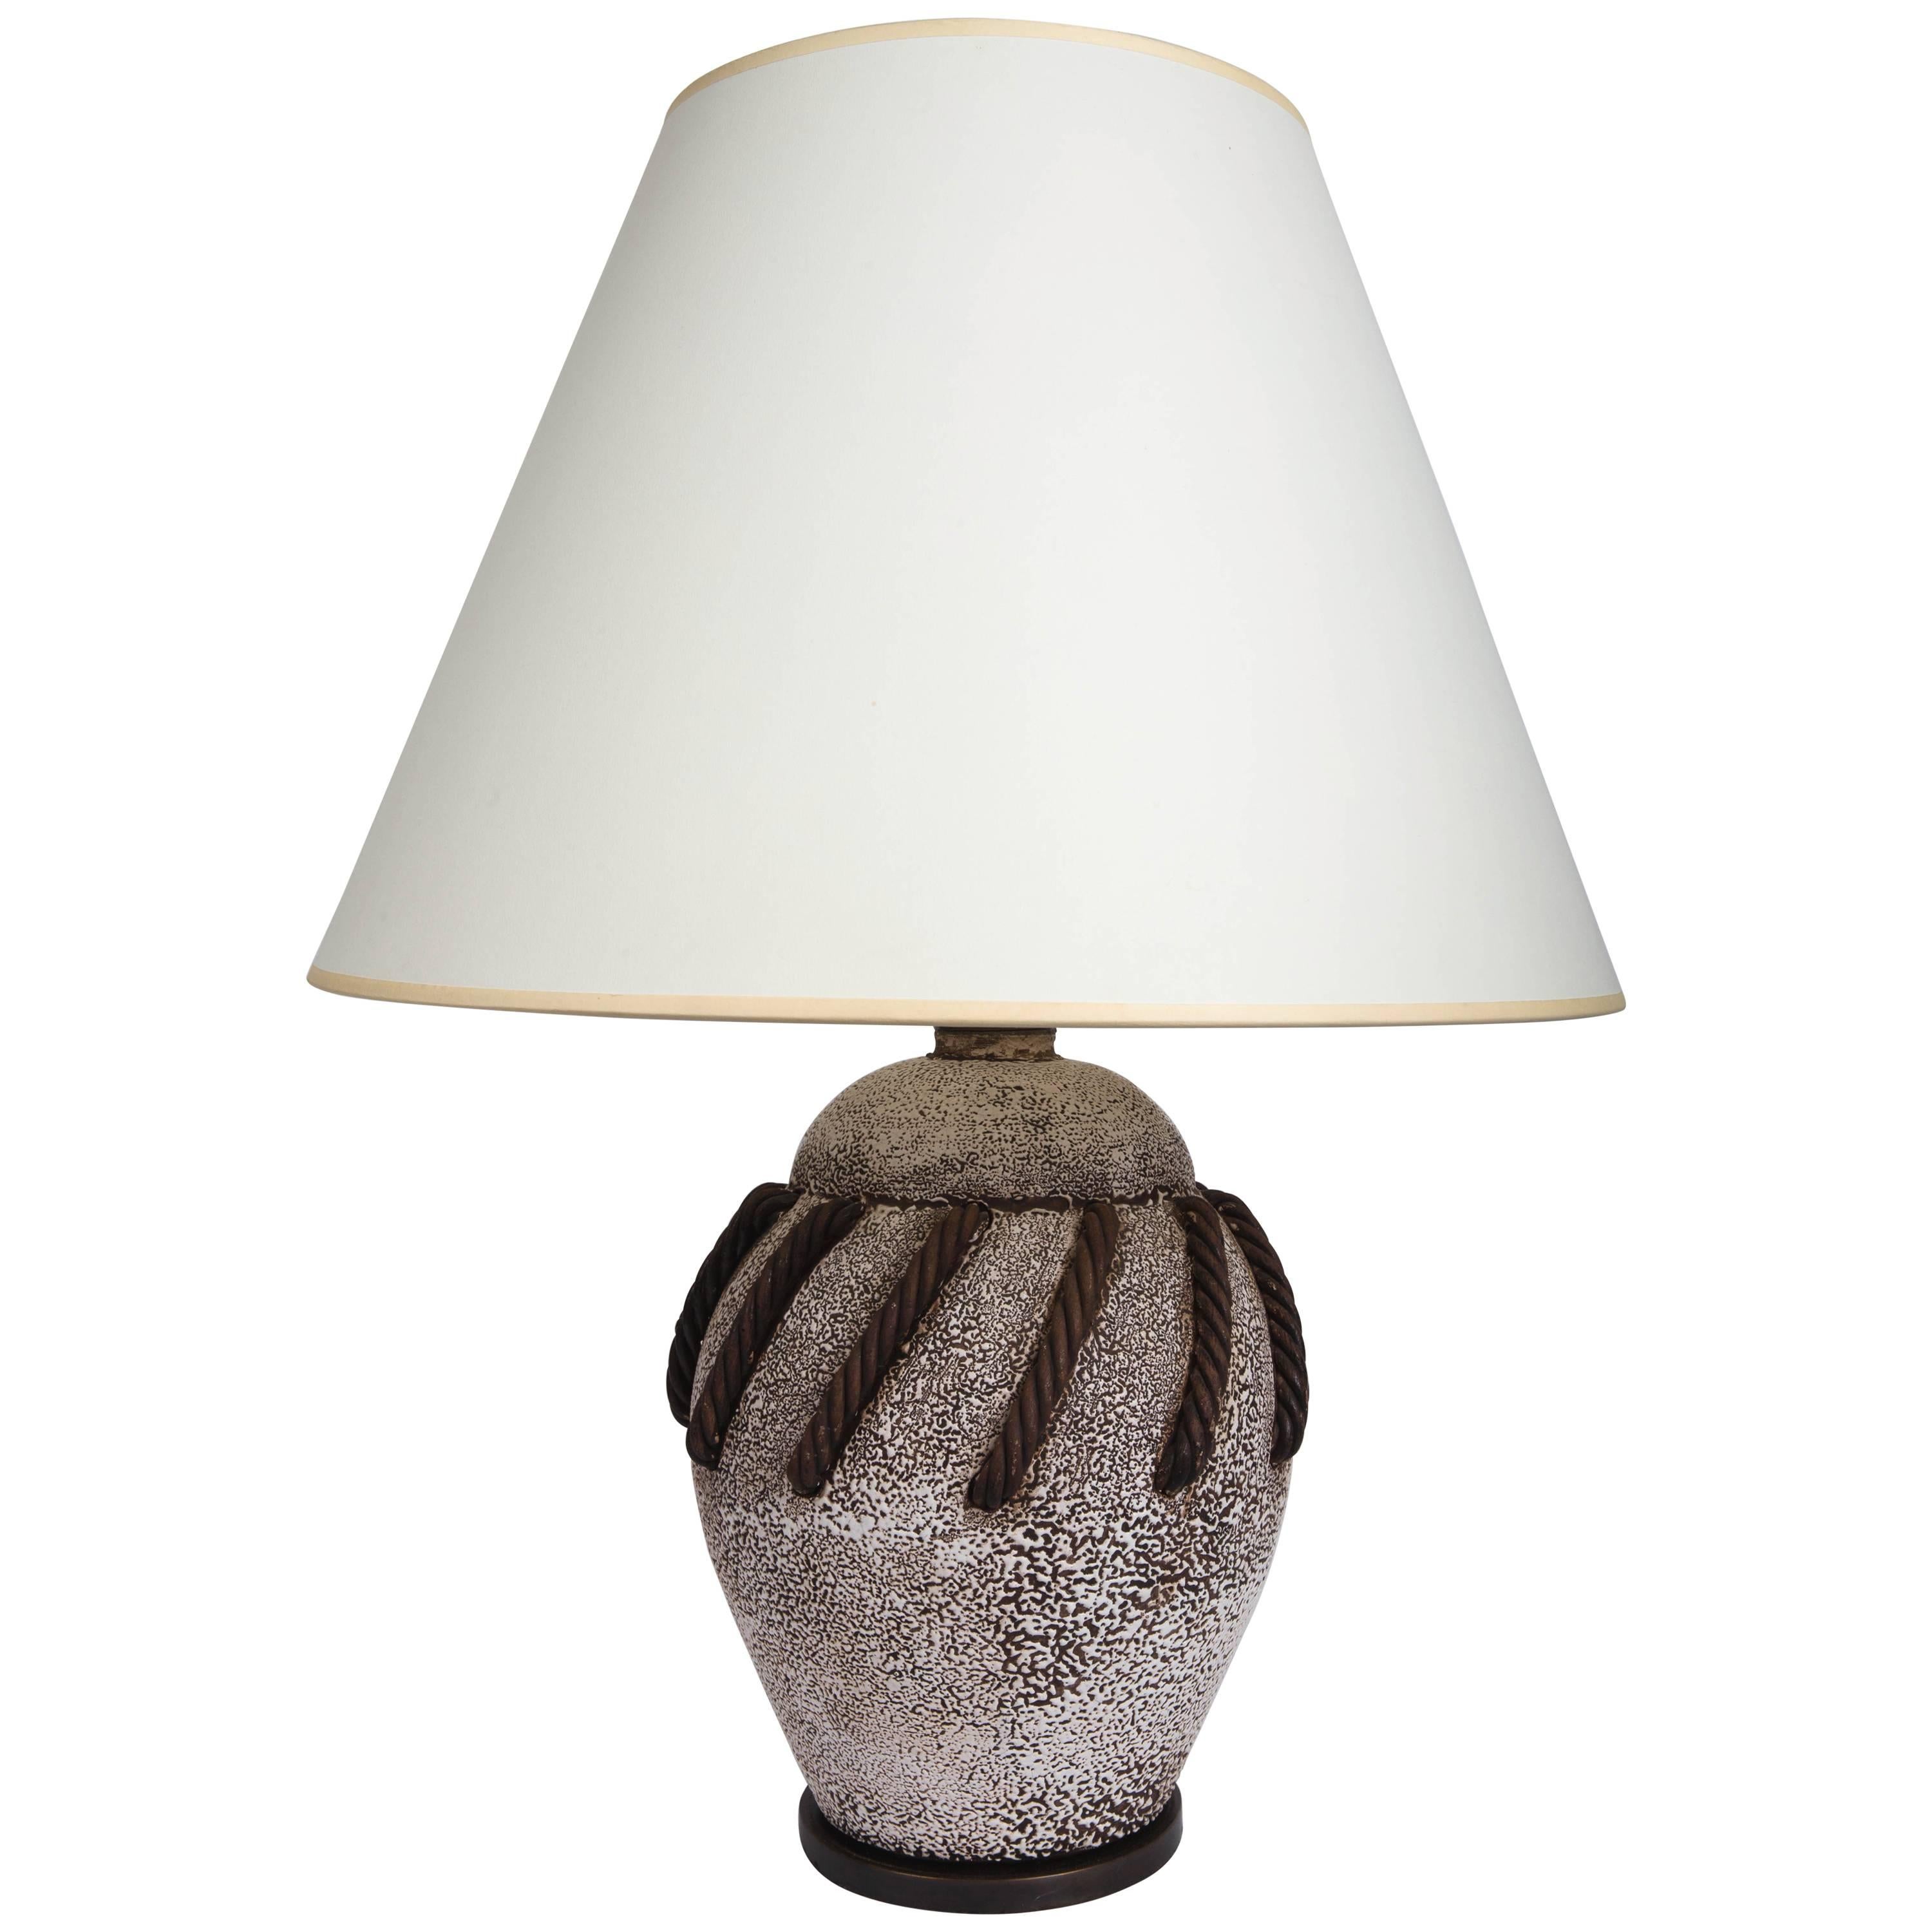 Textured Brown + White Ceramic Lamp with Rope Detailing